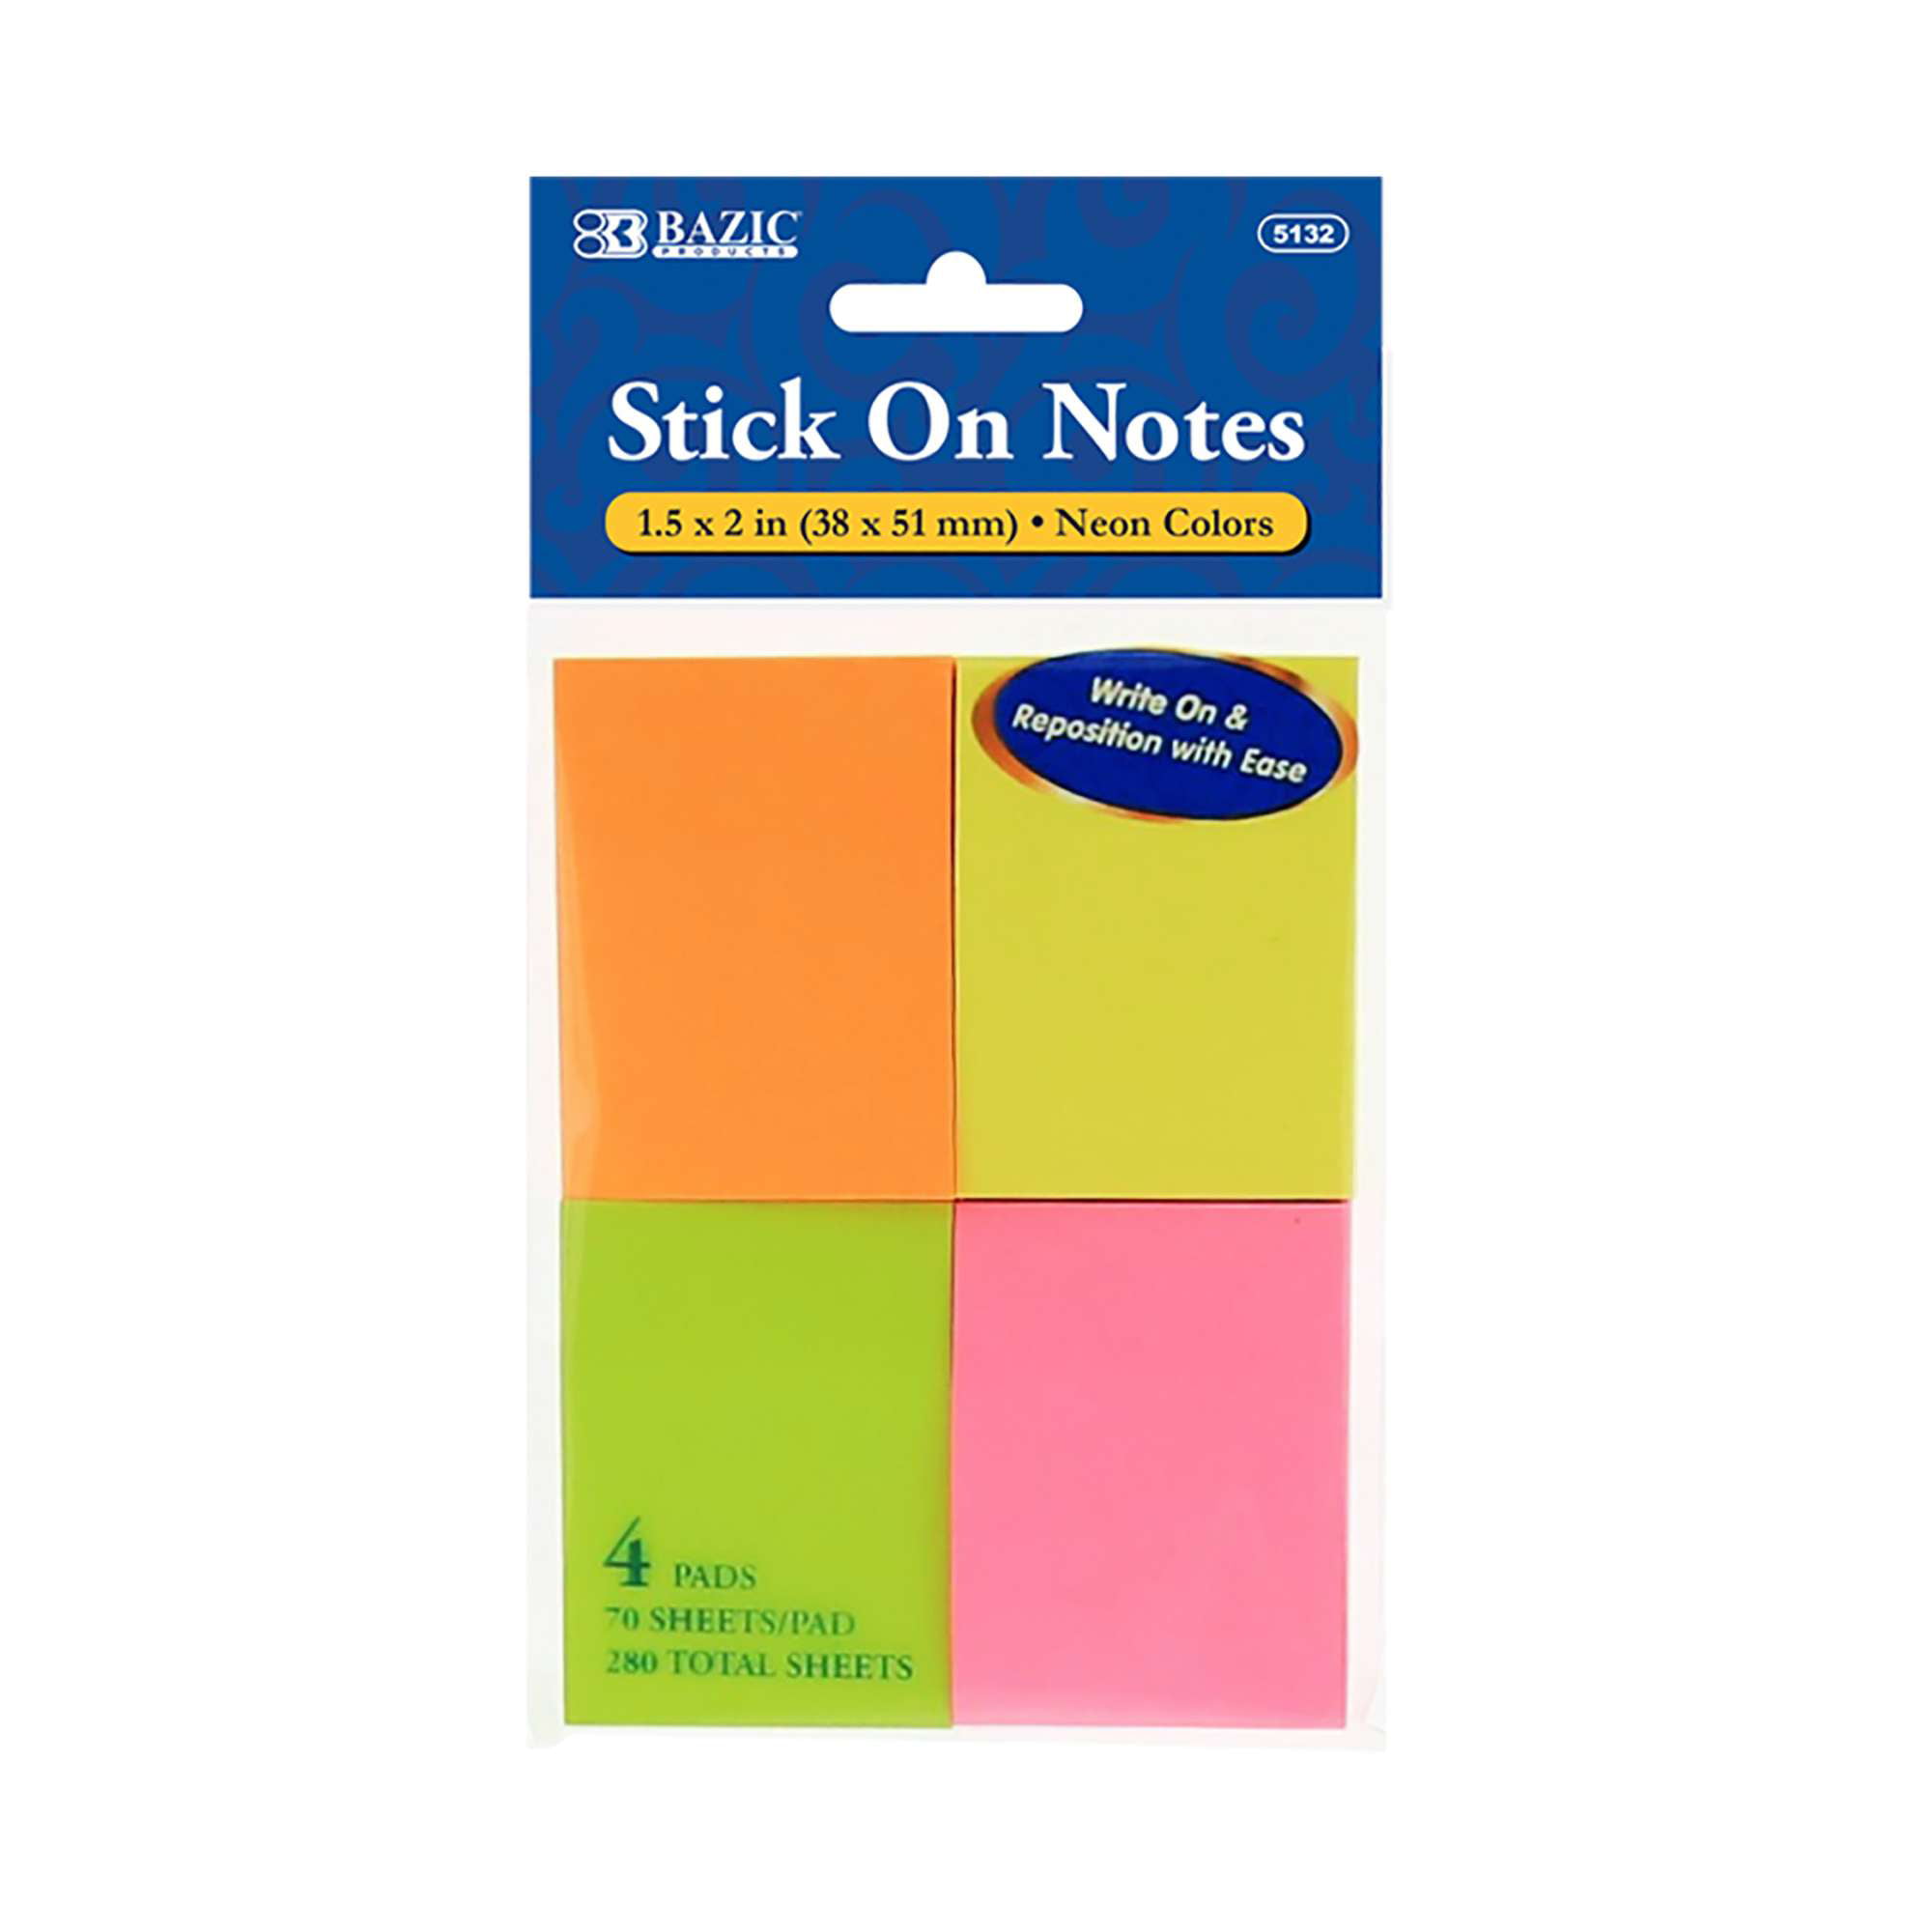 60 Ruled Notes per Pack 10290 Redi-Tag Divider Sticky Notes Assorted Neon Colors Tabbed Self-Stick Lined Note Pad 2 Pack 4 x 6 Inches 